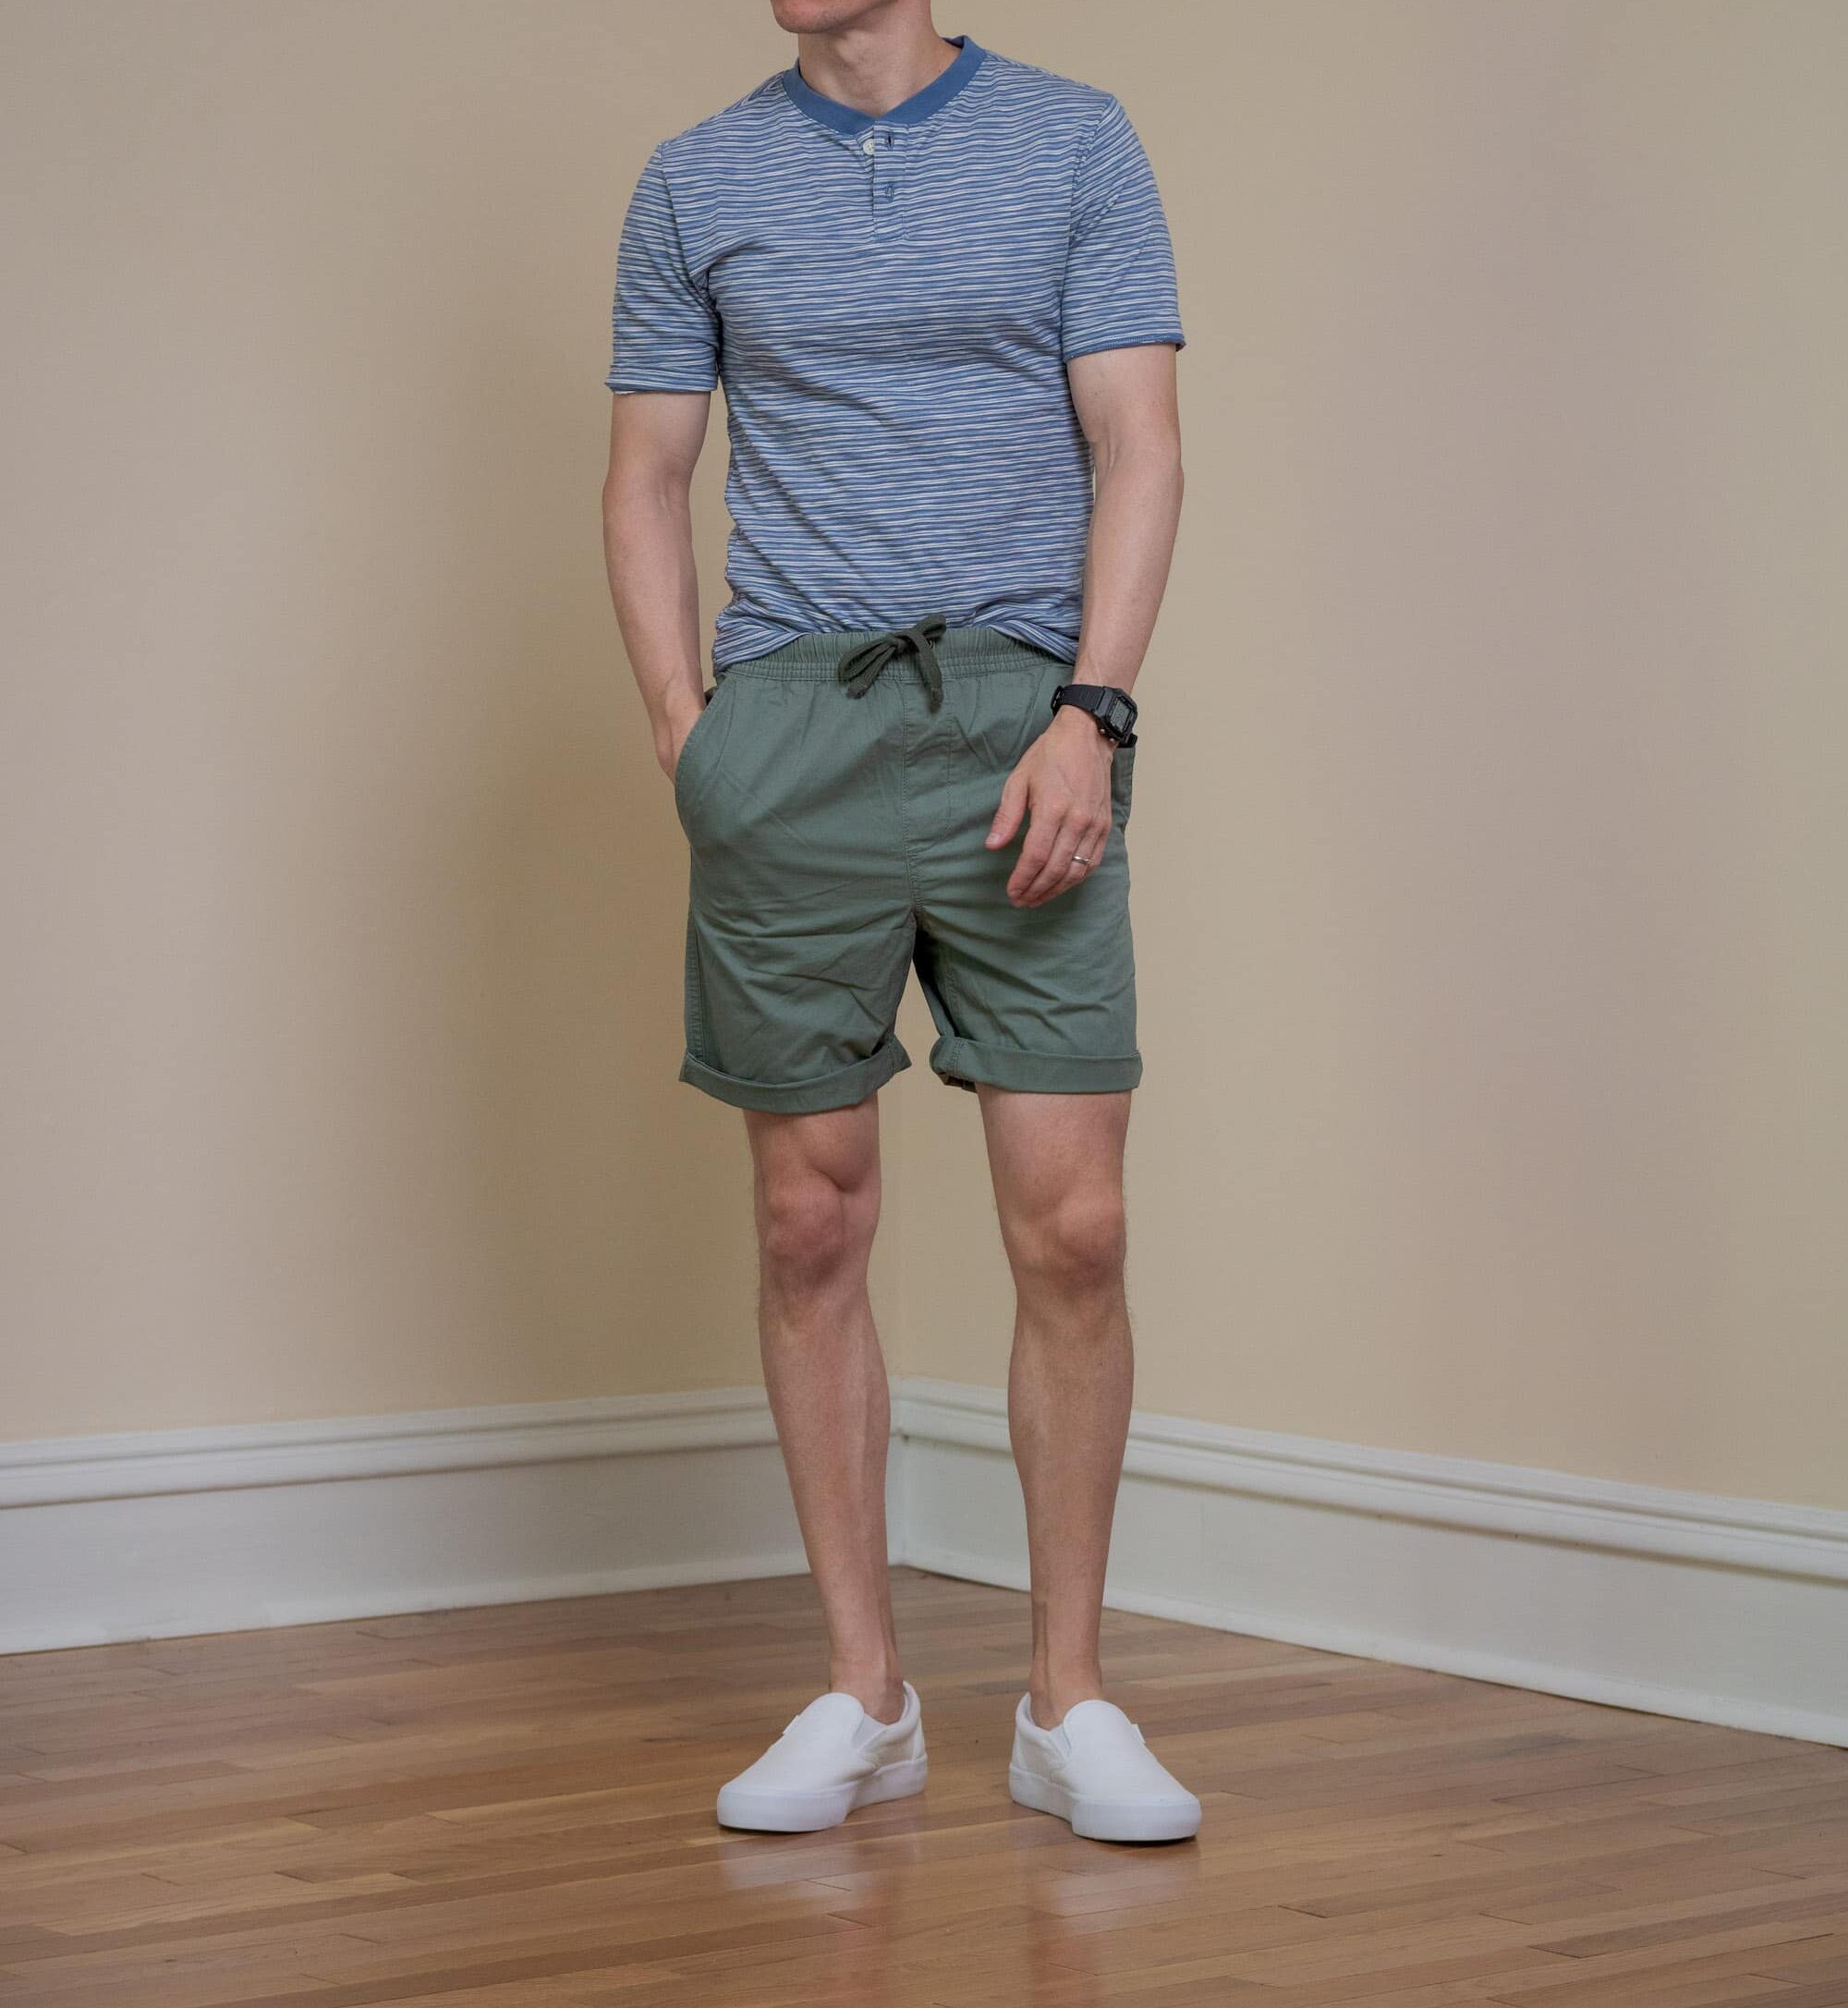 A Collection of Men's Outfit Ideas